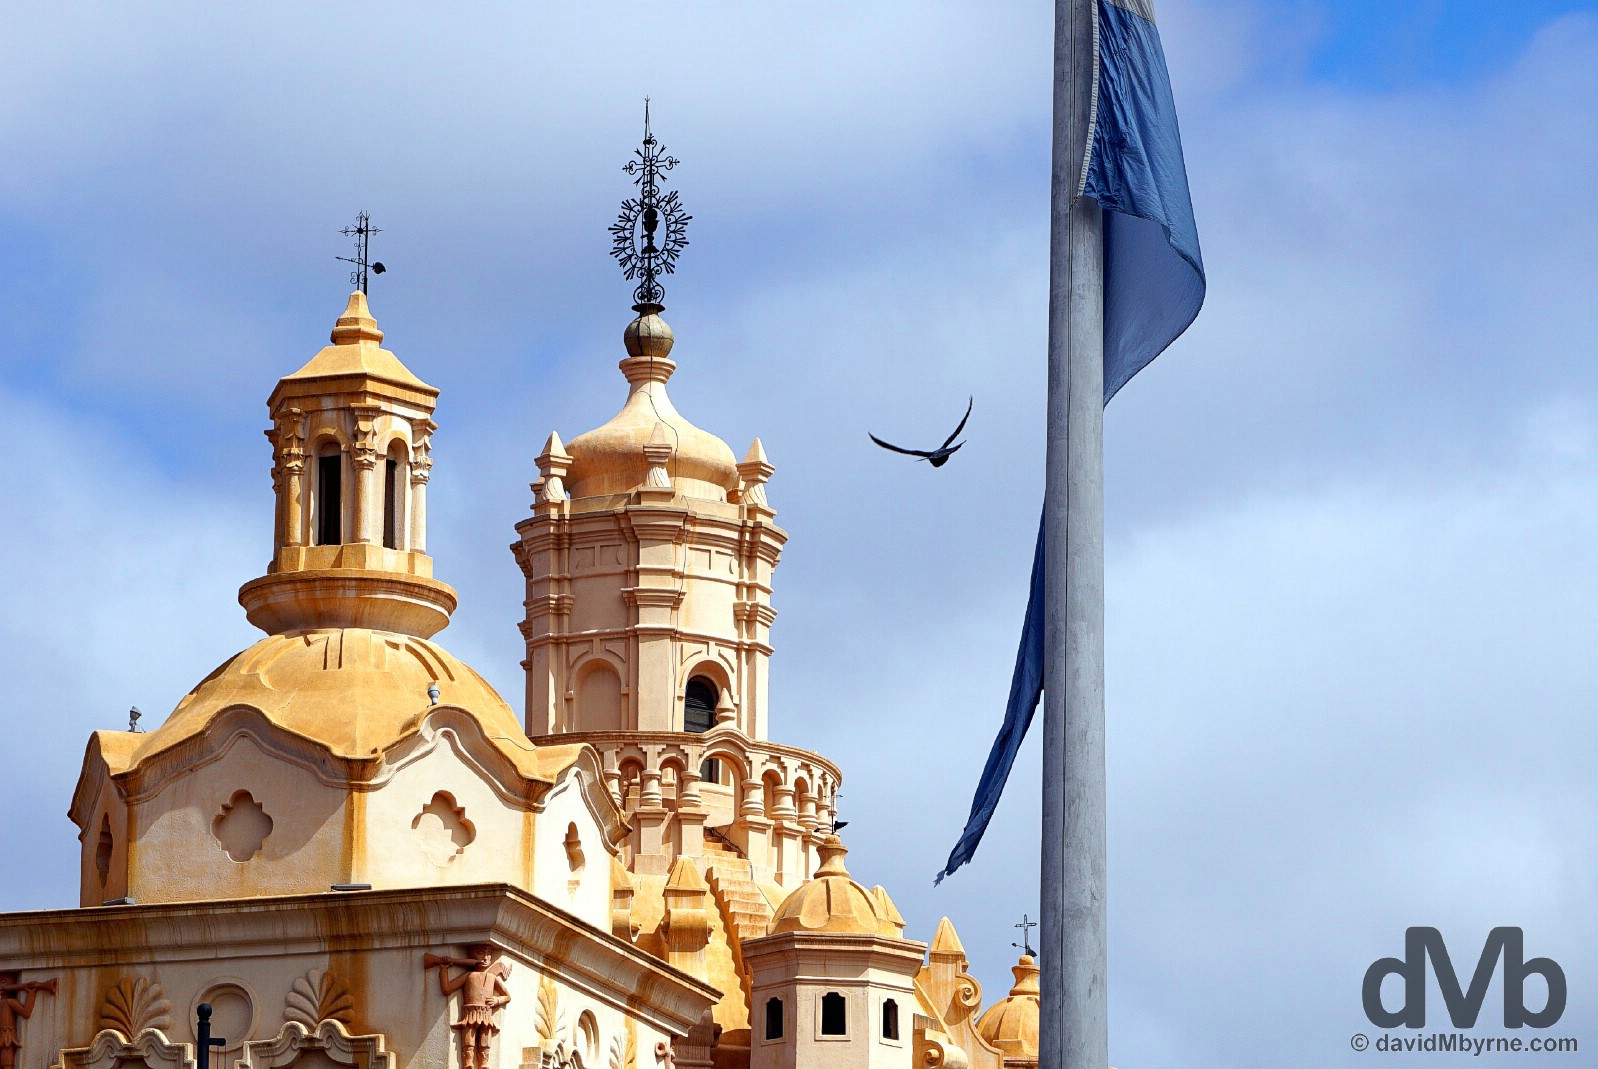 The cathedral & a flag pole as seen from Plaza San Martin in Cordoba, Argentina. September 24, 2015. 